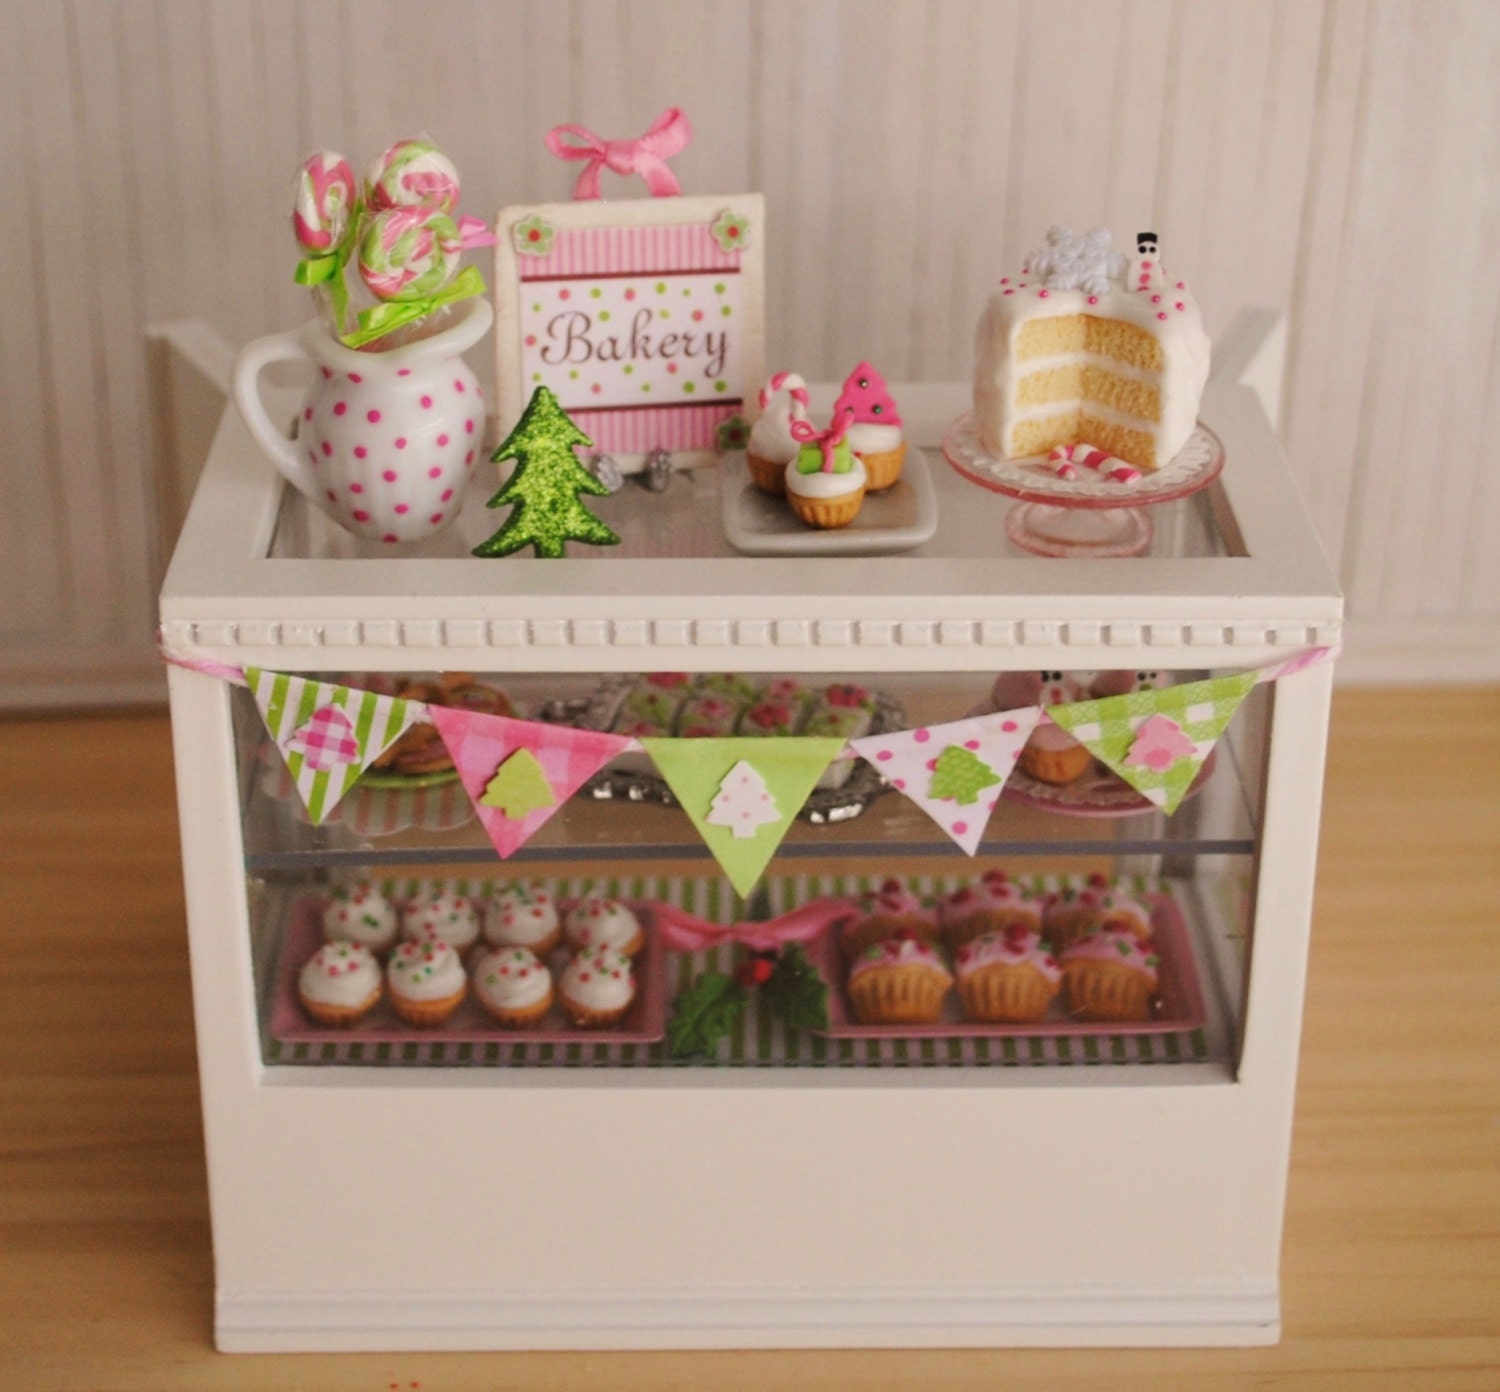 Miniature Christmas Bakery Case In Pink And Green Filled With Cupcakes, Cookies, Petit Fours, And More - LittleThingsByAnna